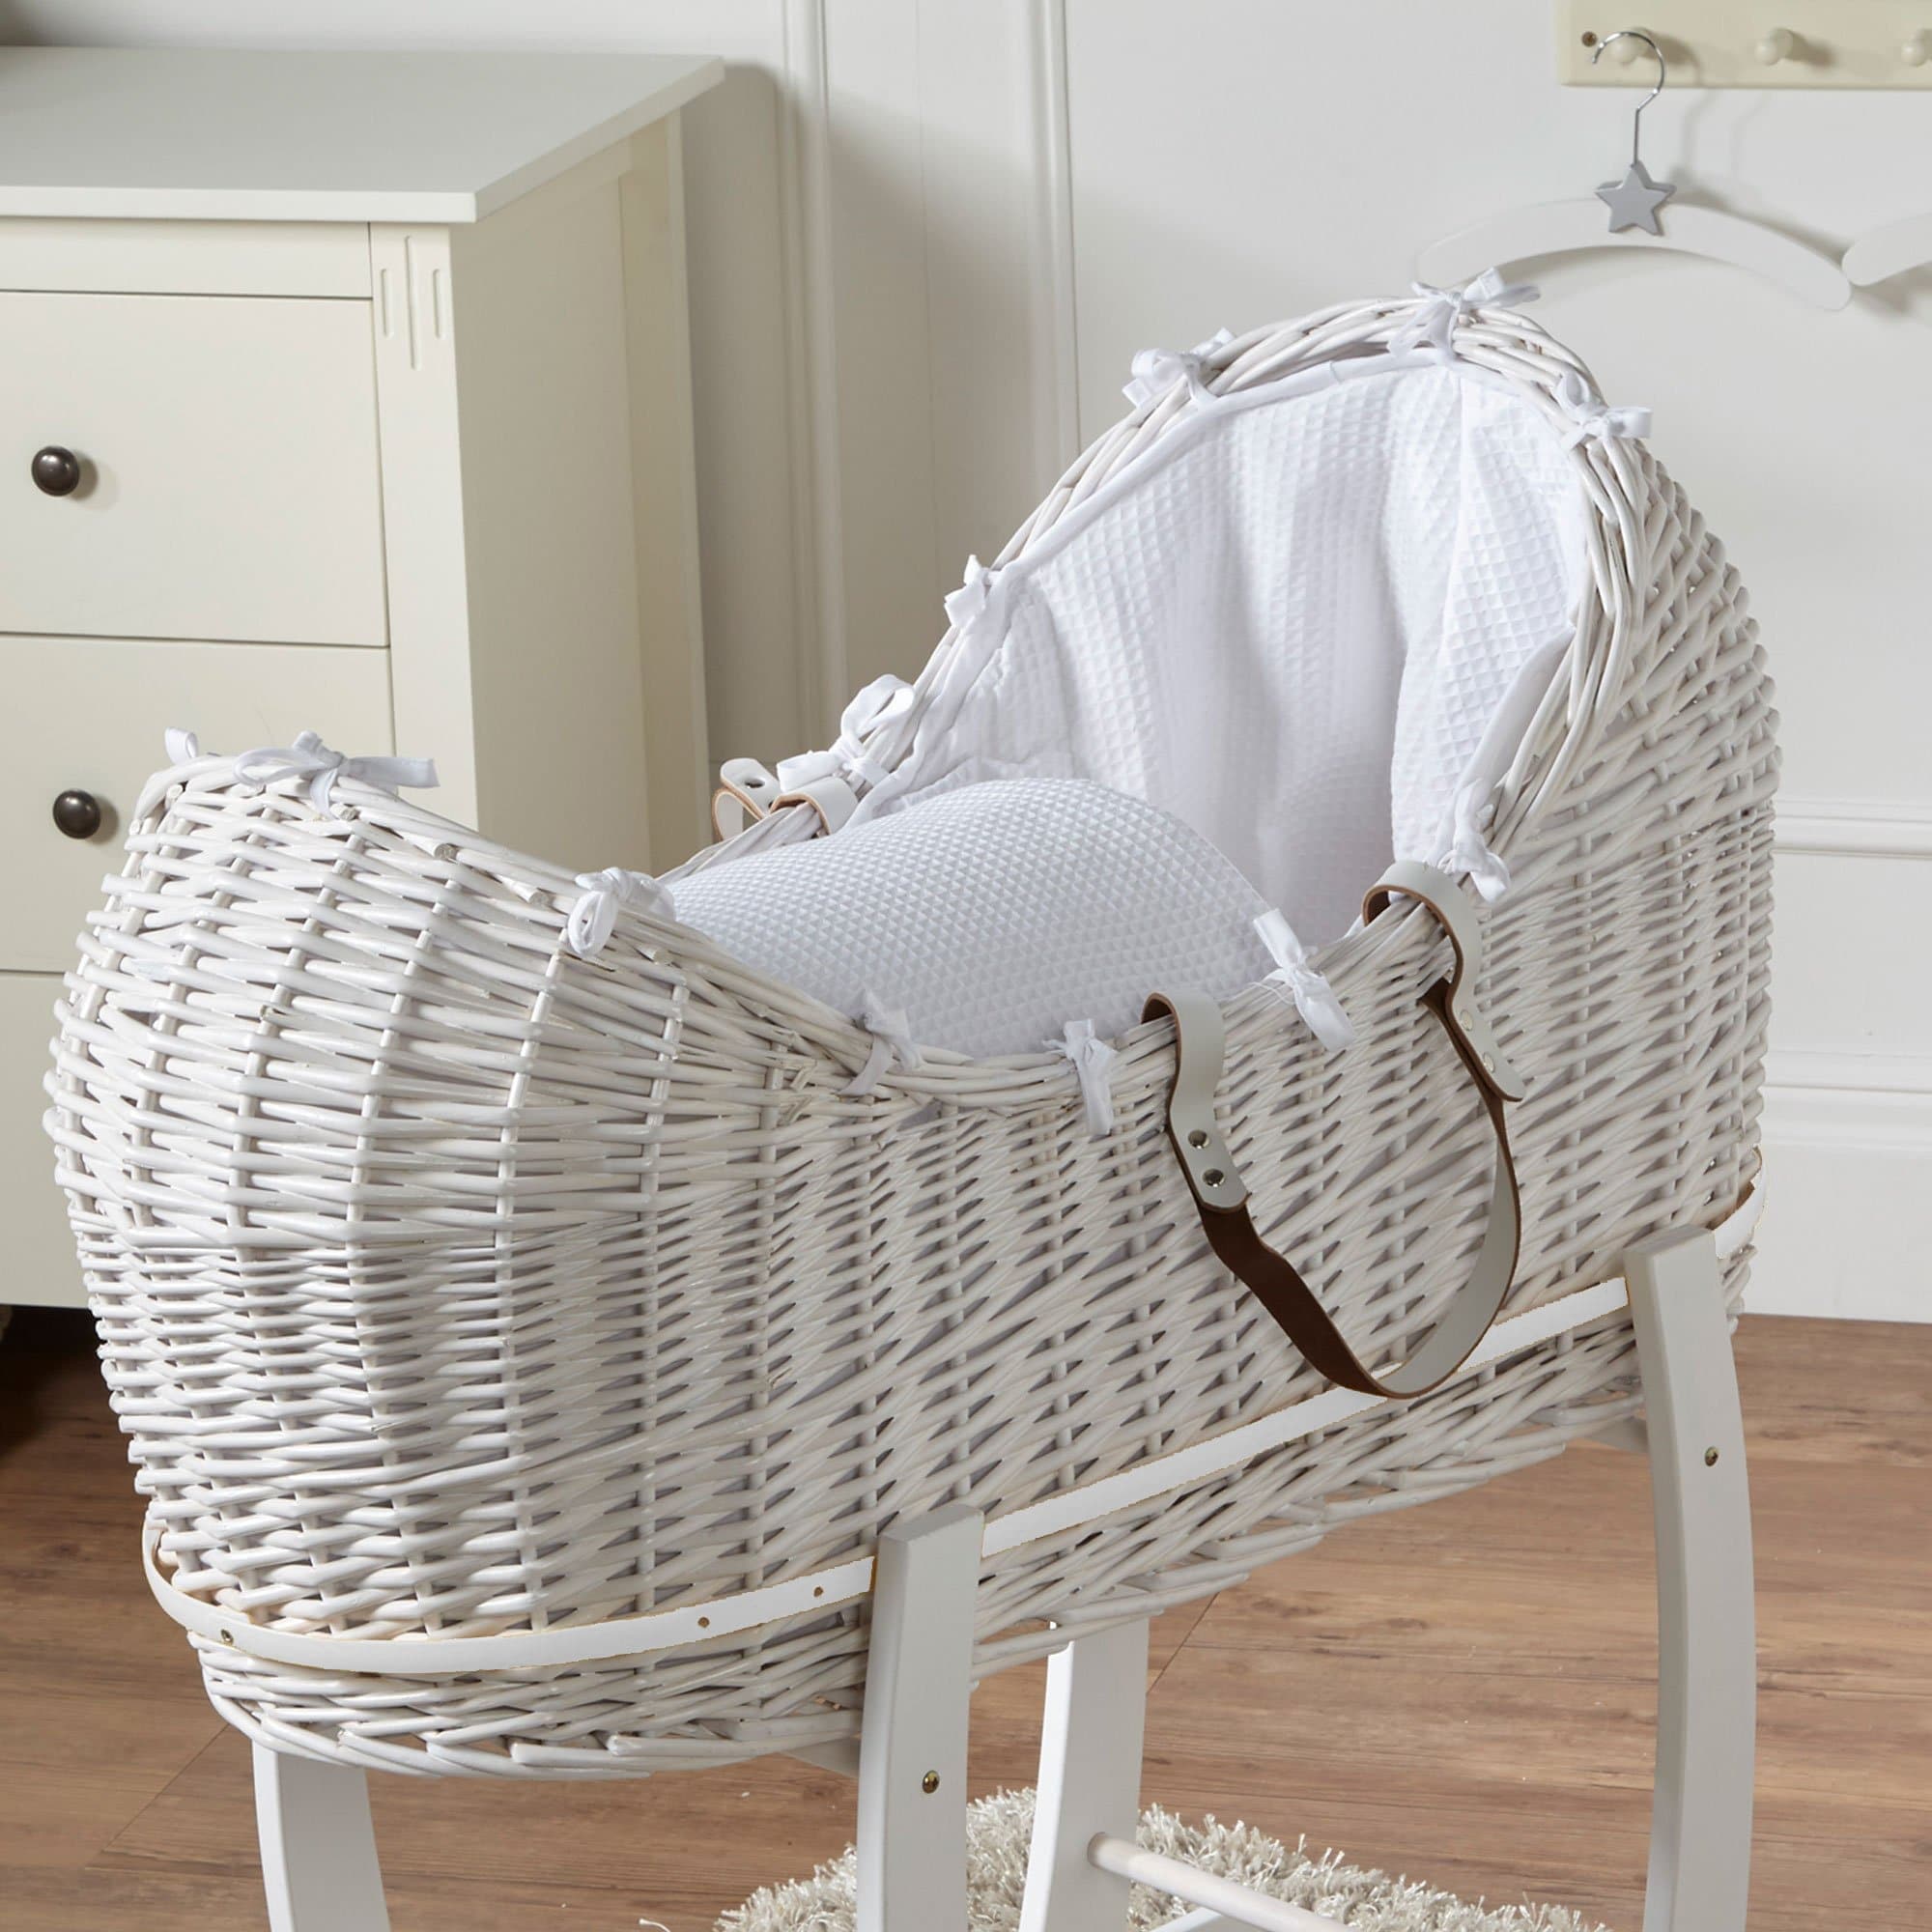 Wicker Pod Baby Deluxe Moses Basket - White / Waffle / White | For Your Little One